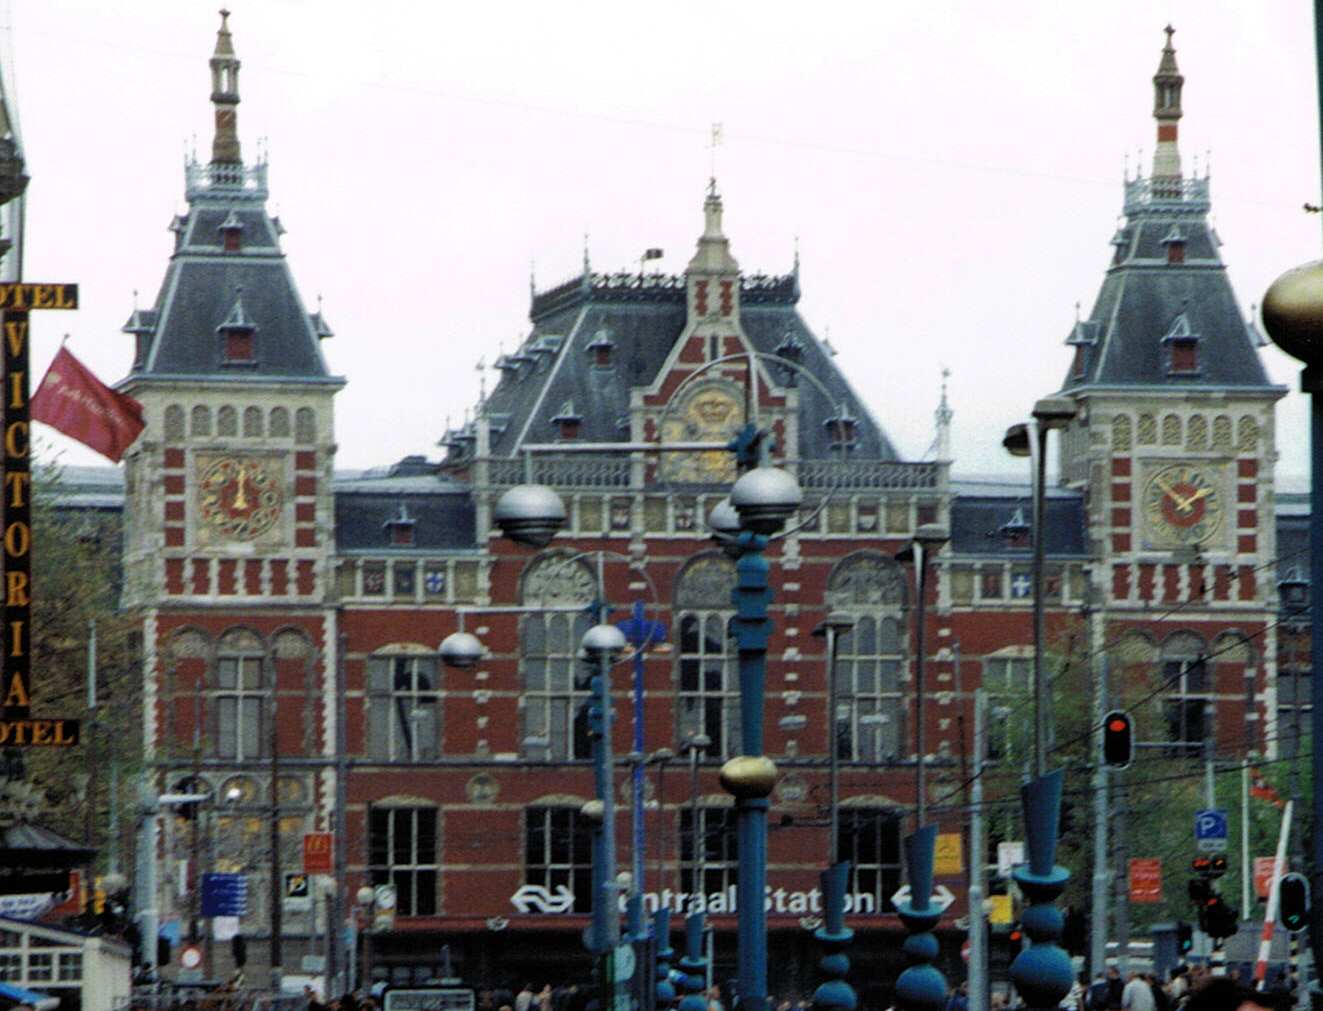 Central Station in Amsterdam